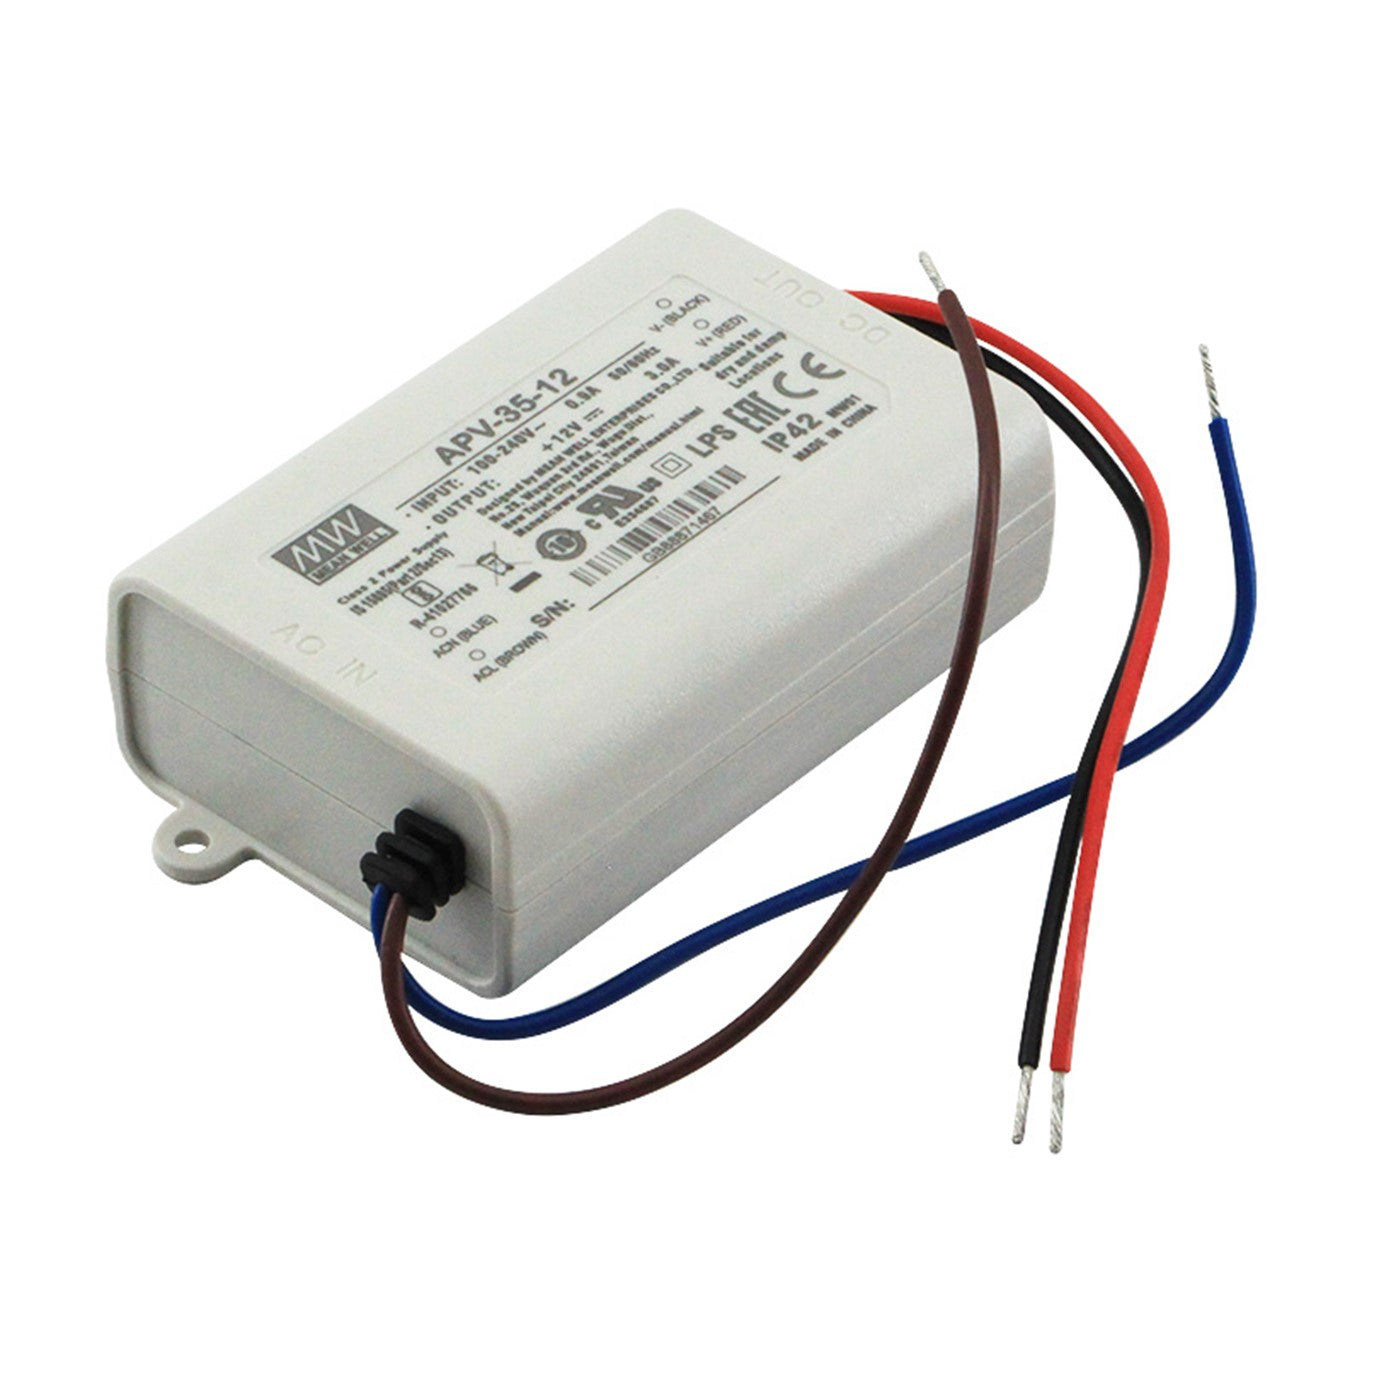 Mean well 12vx3a Constant Voltage Drivers APV-35-12 IP42